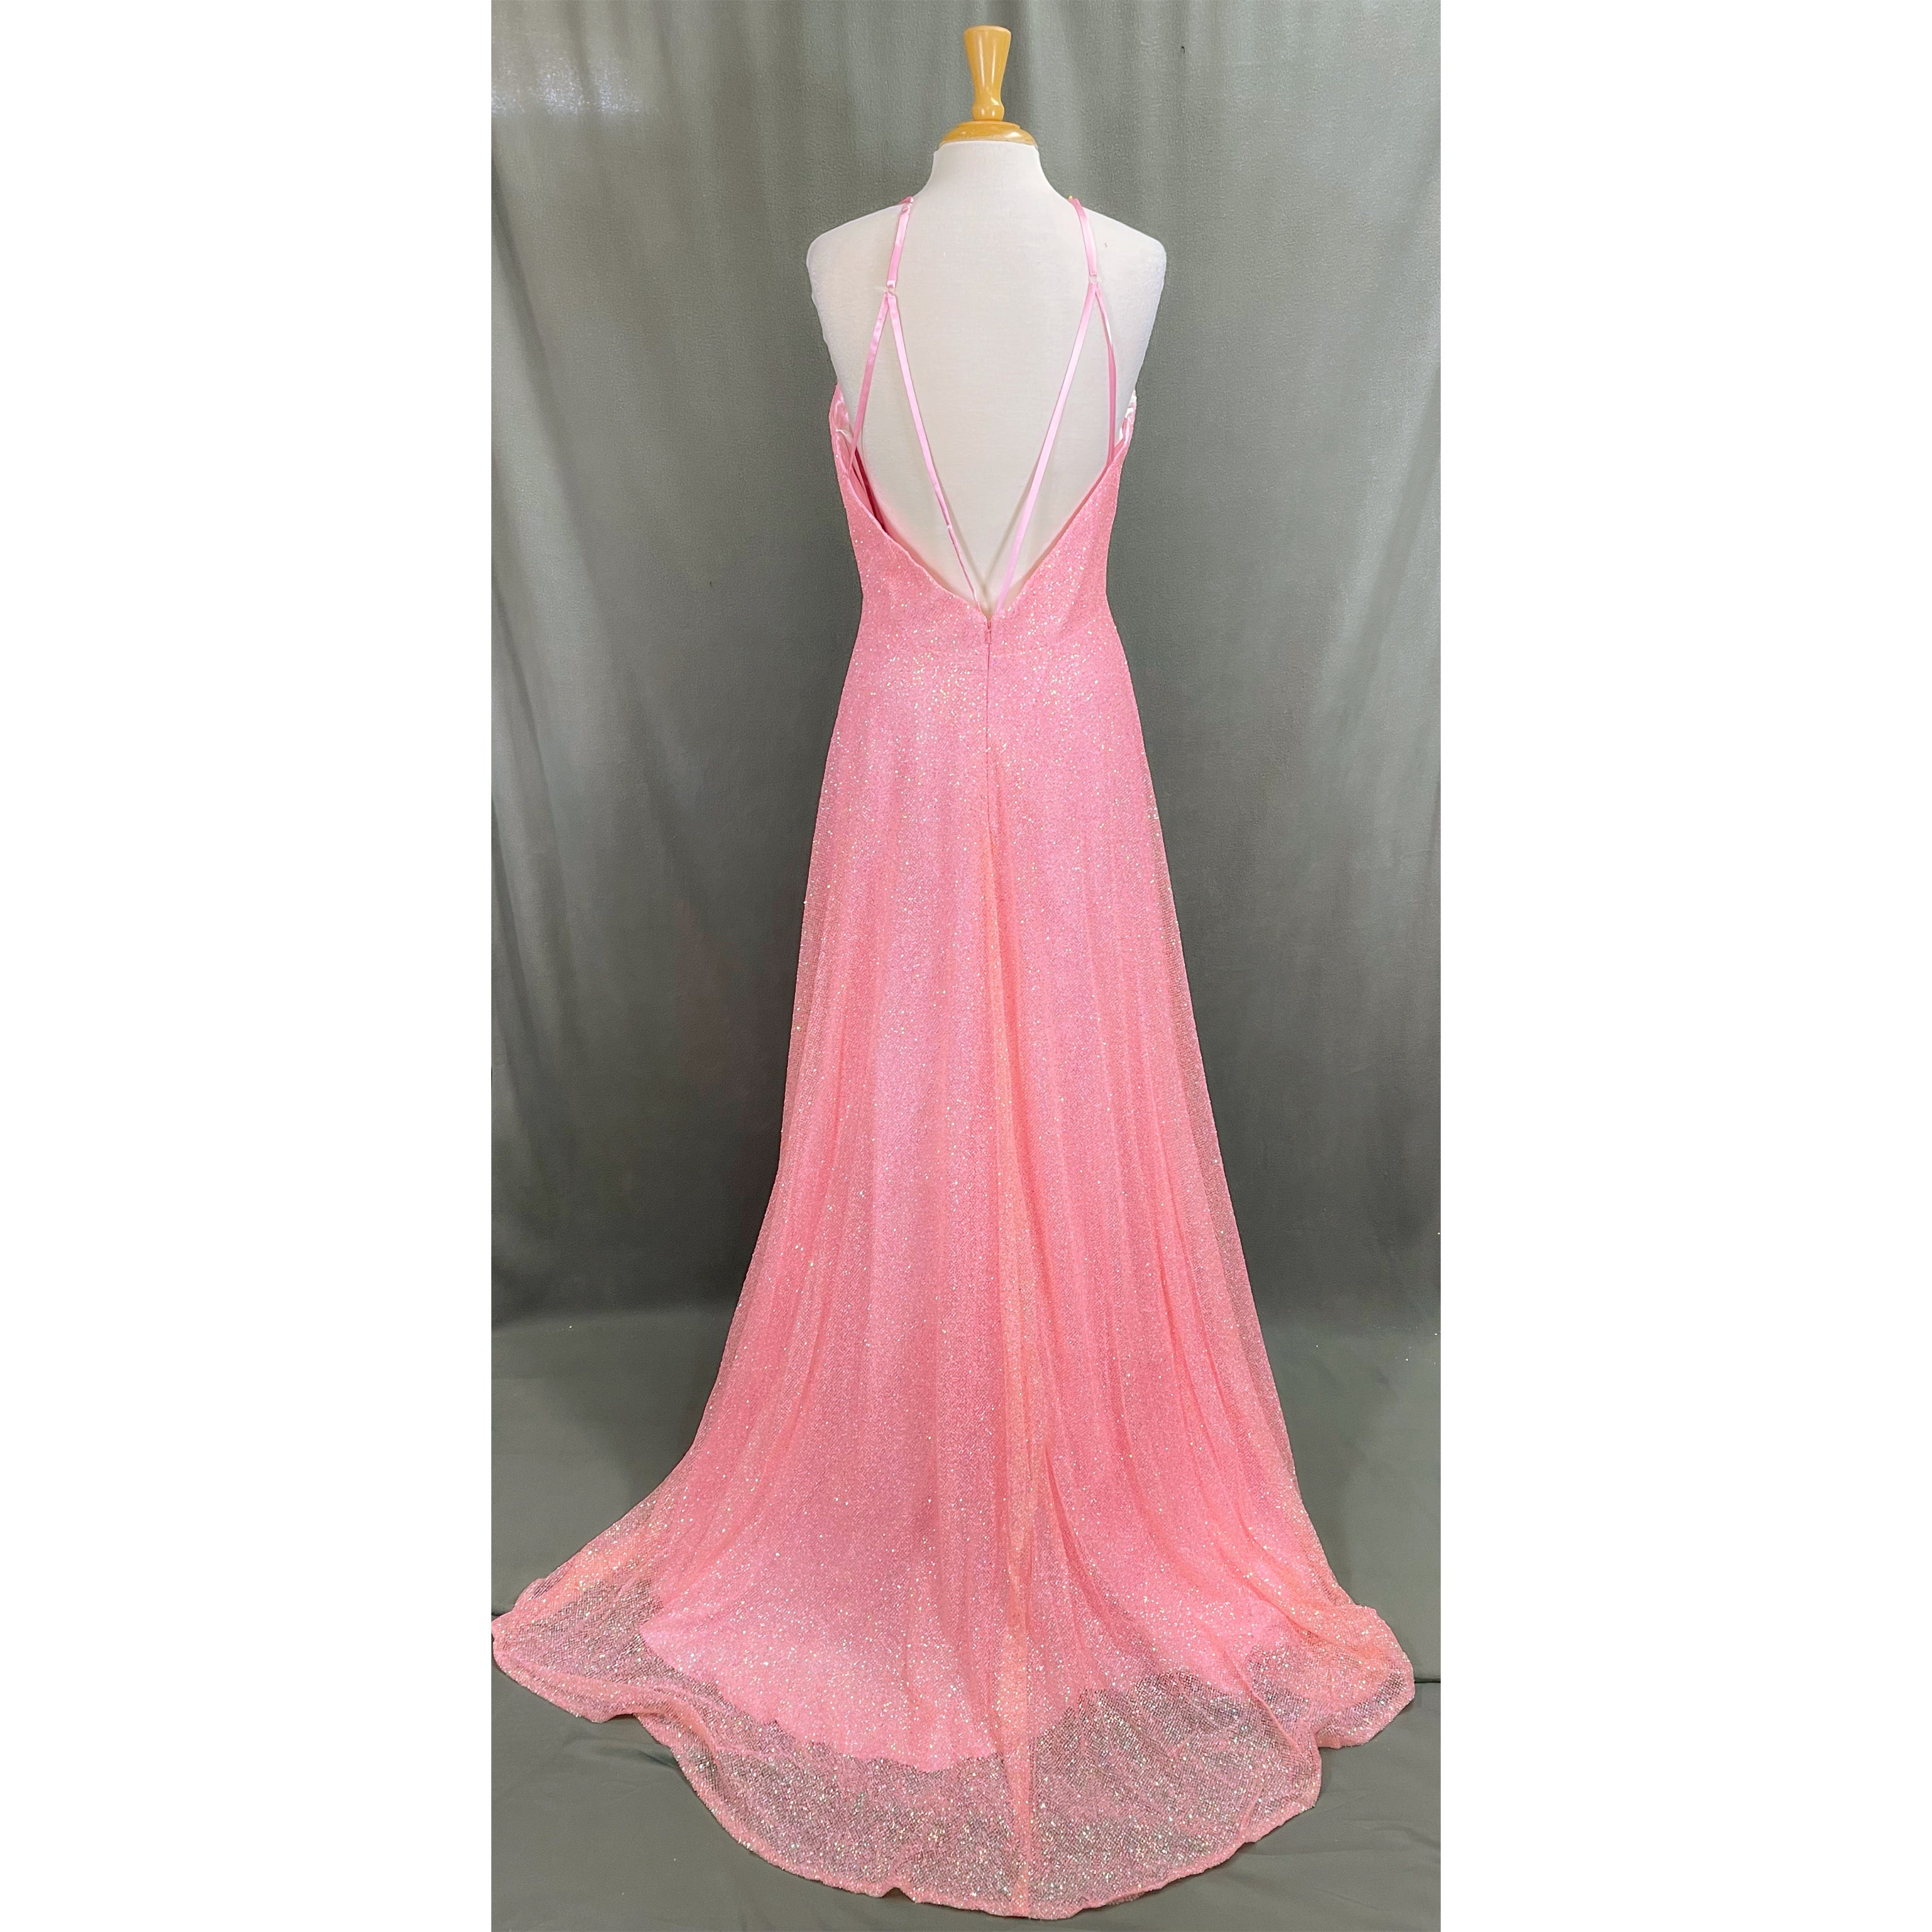 Alyce blossom pink dress, size 16, NEW WITH TAGS!